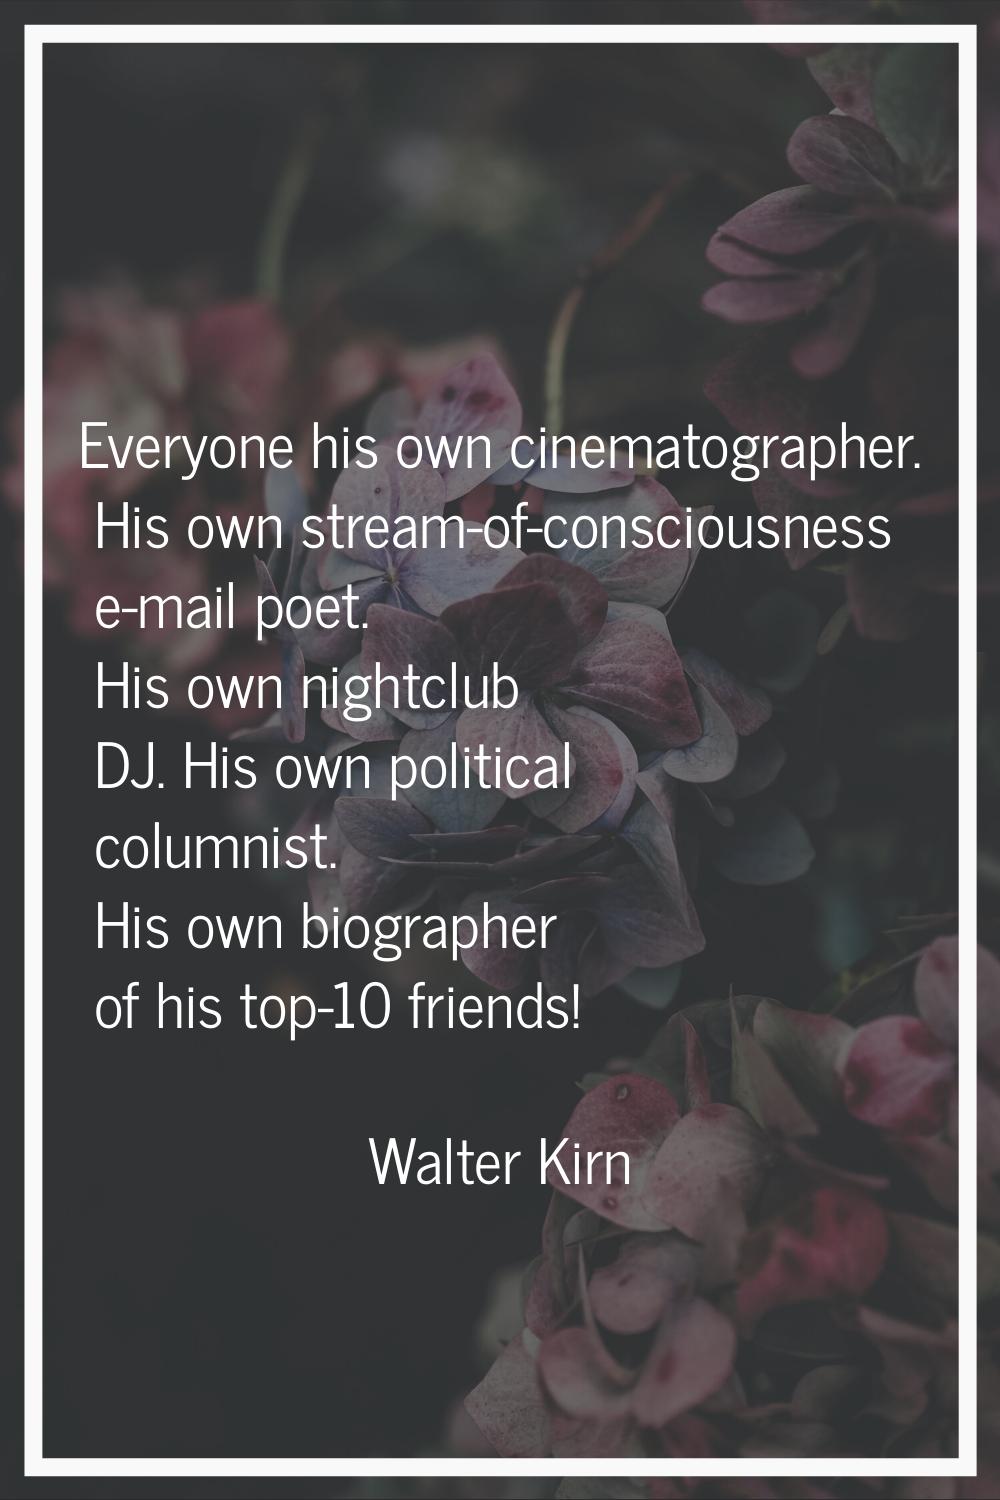 Everyone his own cinematographer. His own stream-of-consciousness e-mail poet. His own nightclub DJ